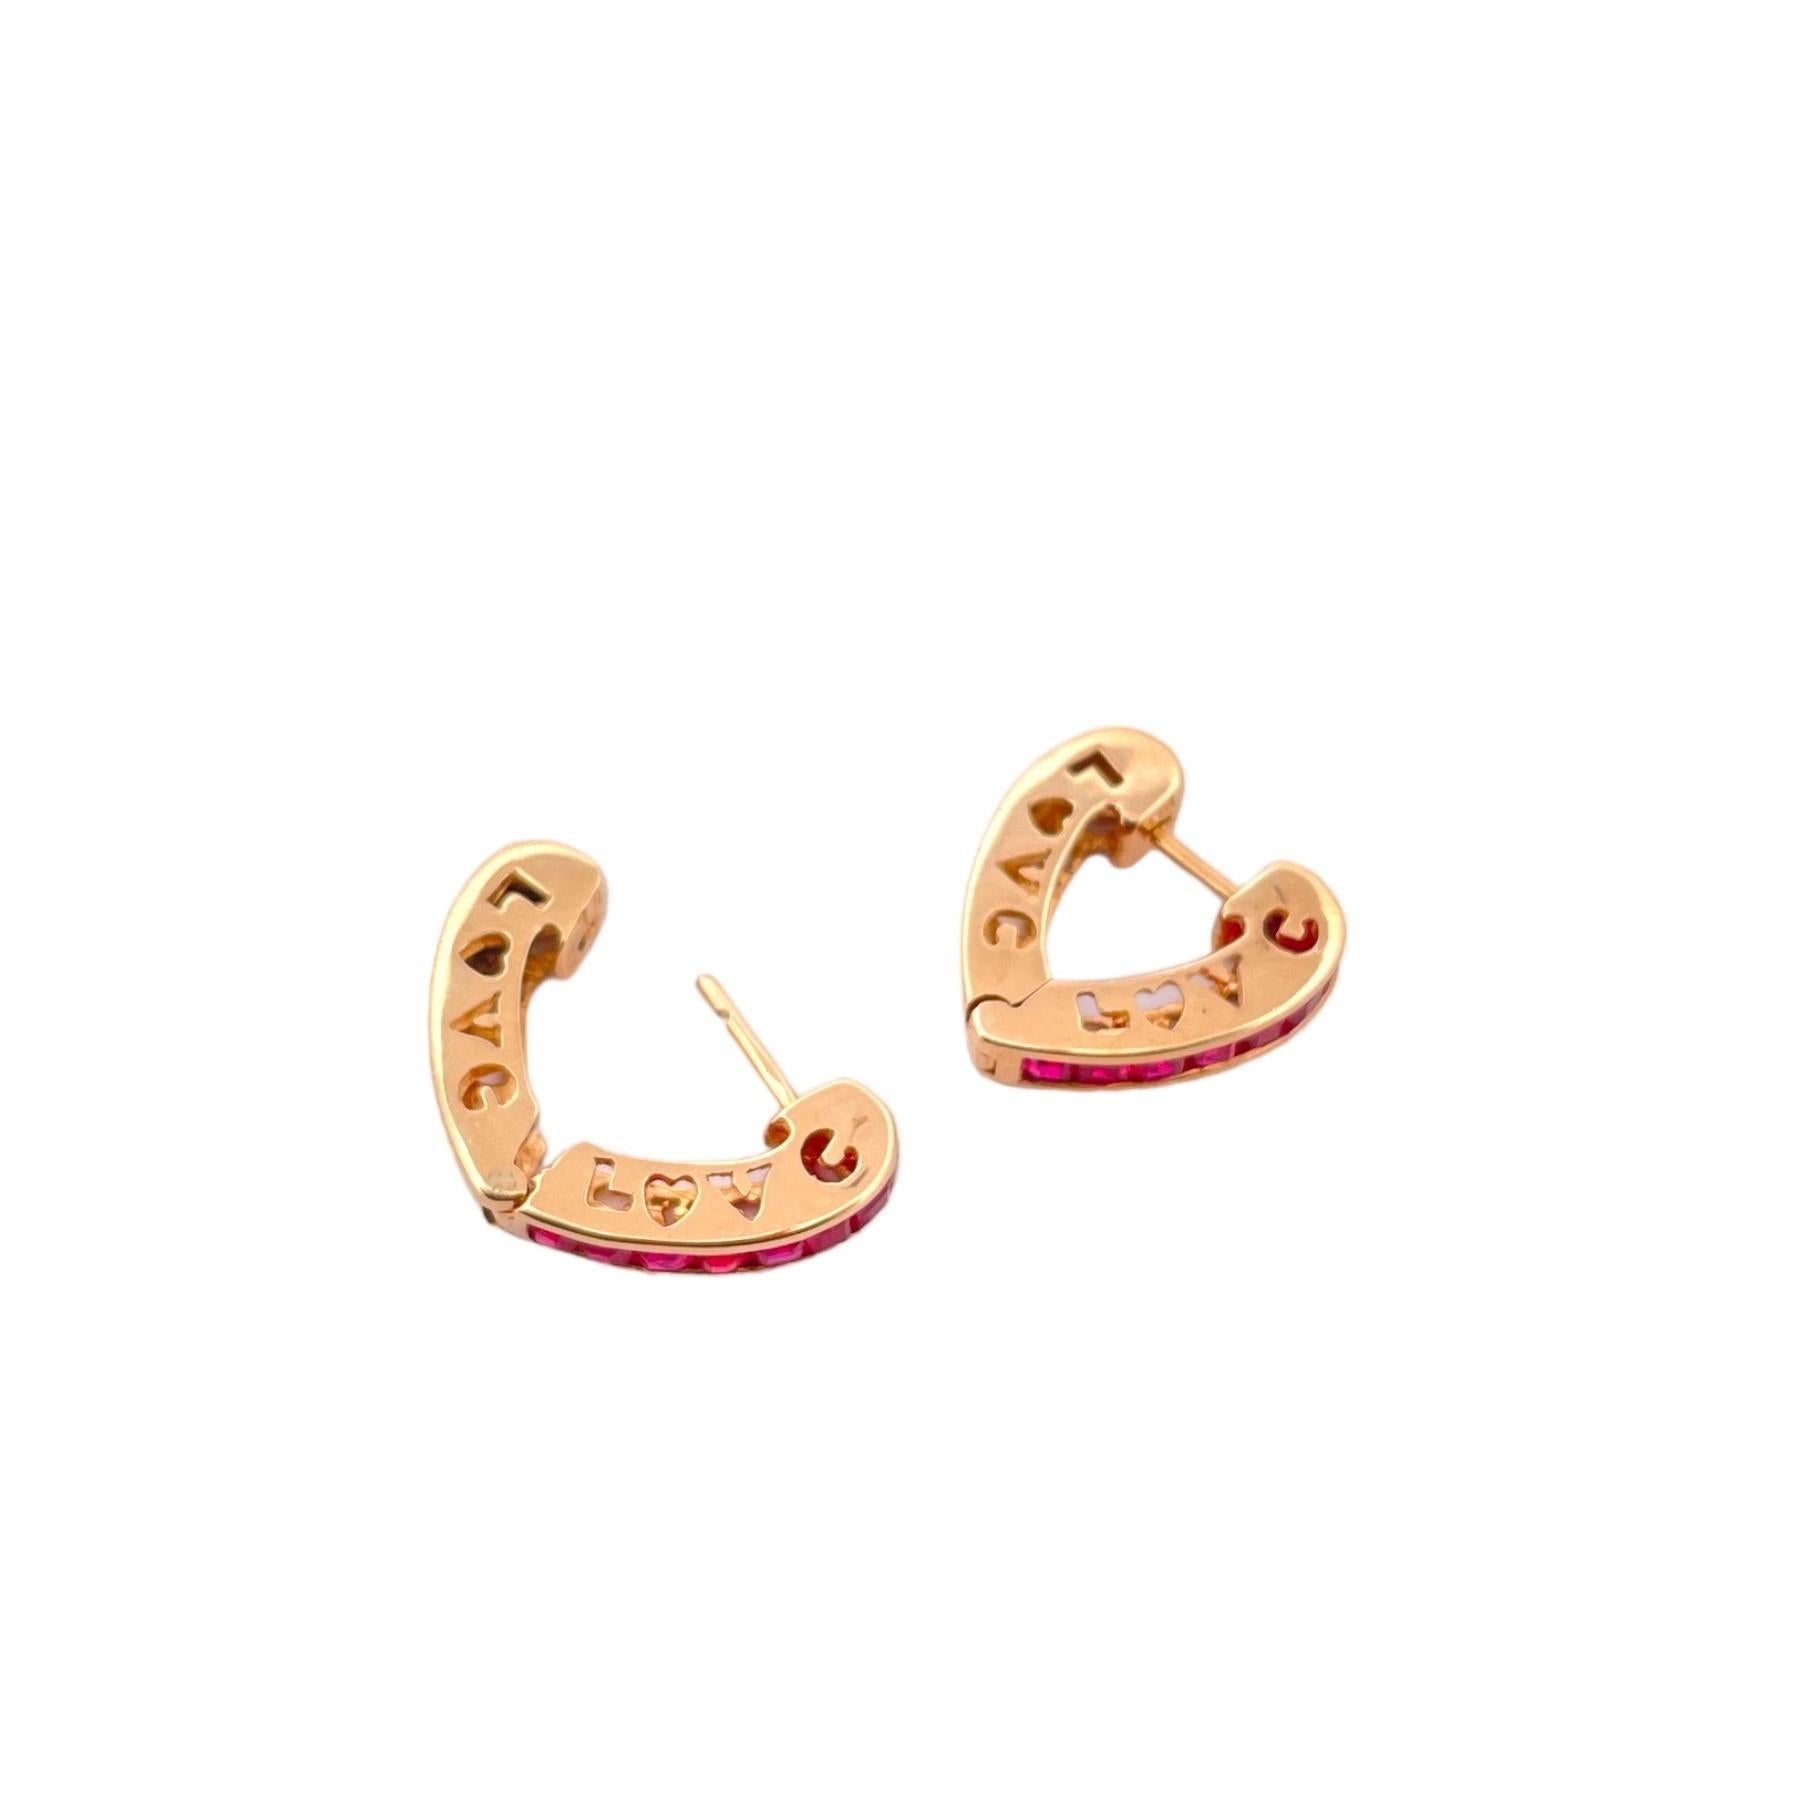 Square Cut 10K Yellow Gold Heart-Shaped Love Huggie Earrings with Rubies